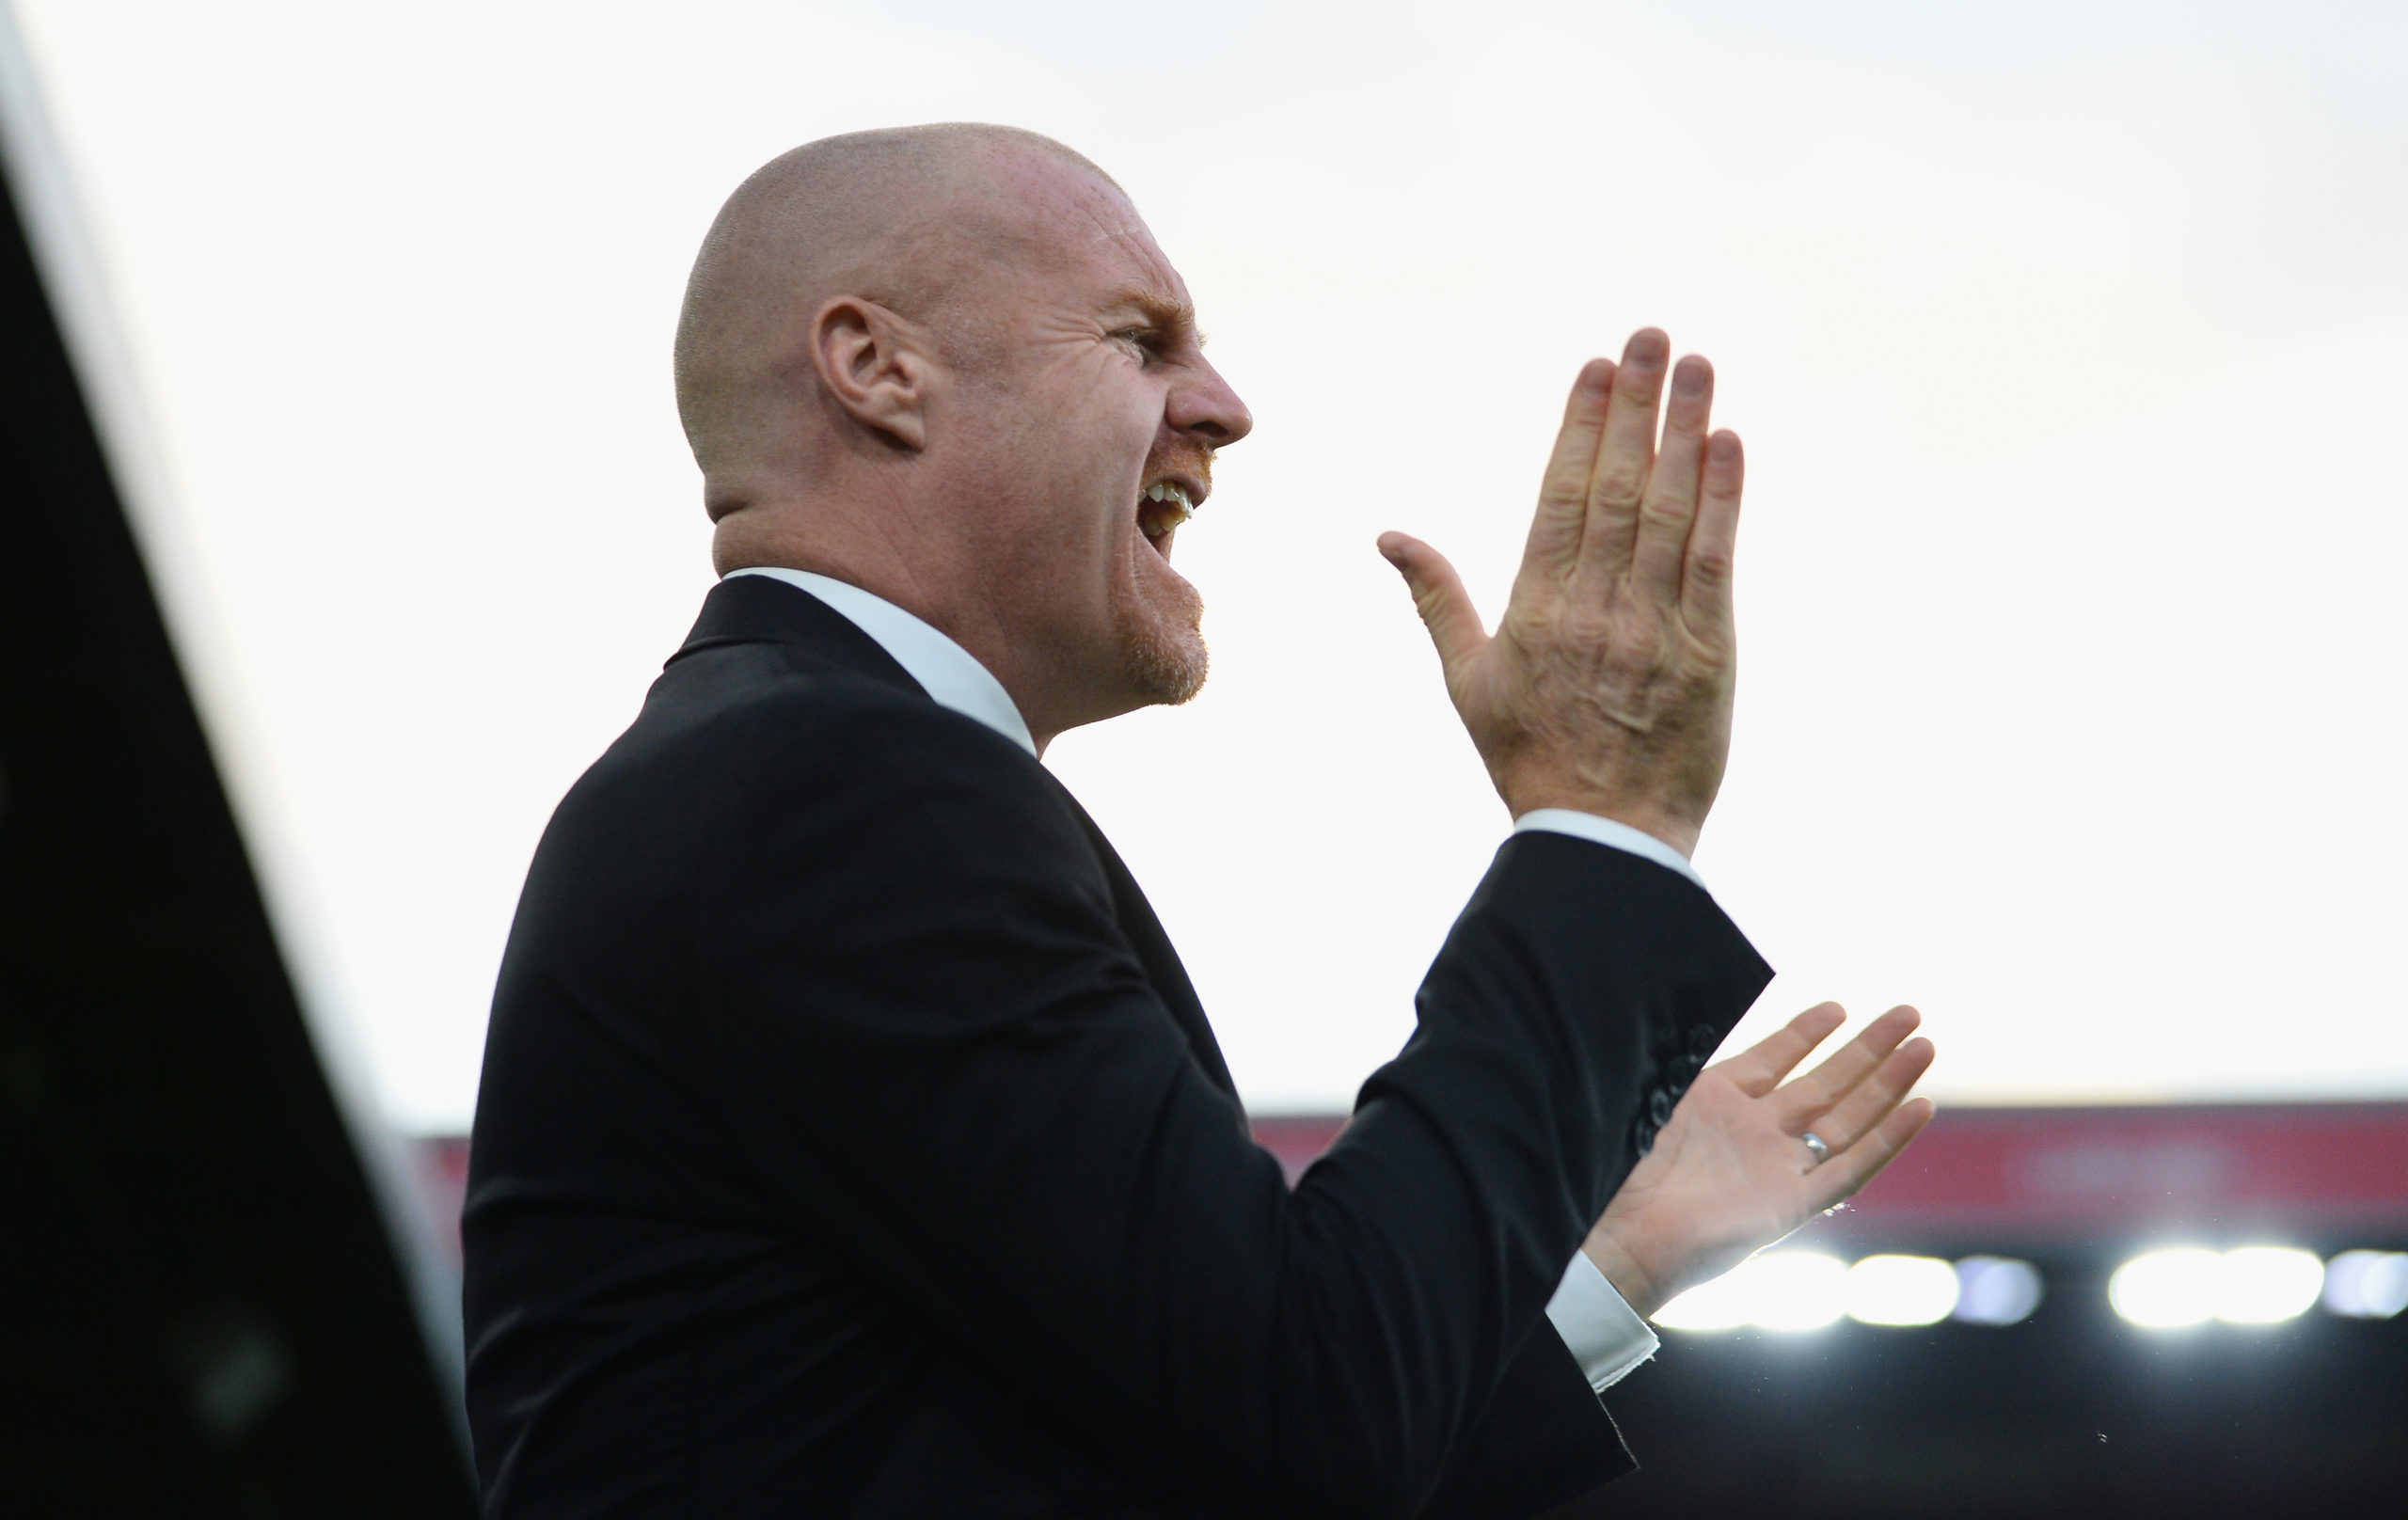 Burnley manager Sean Dyche